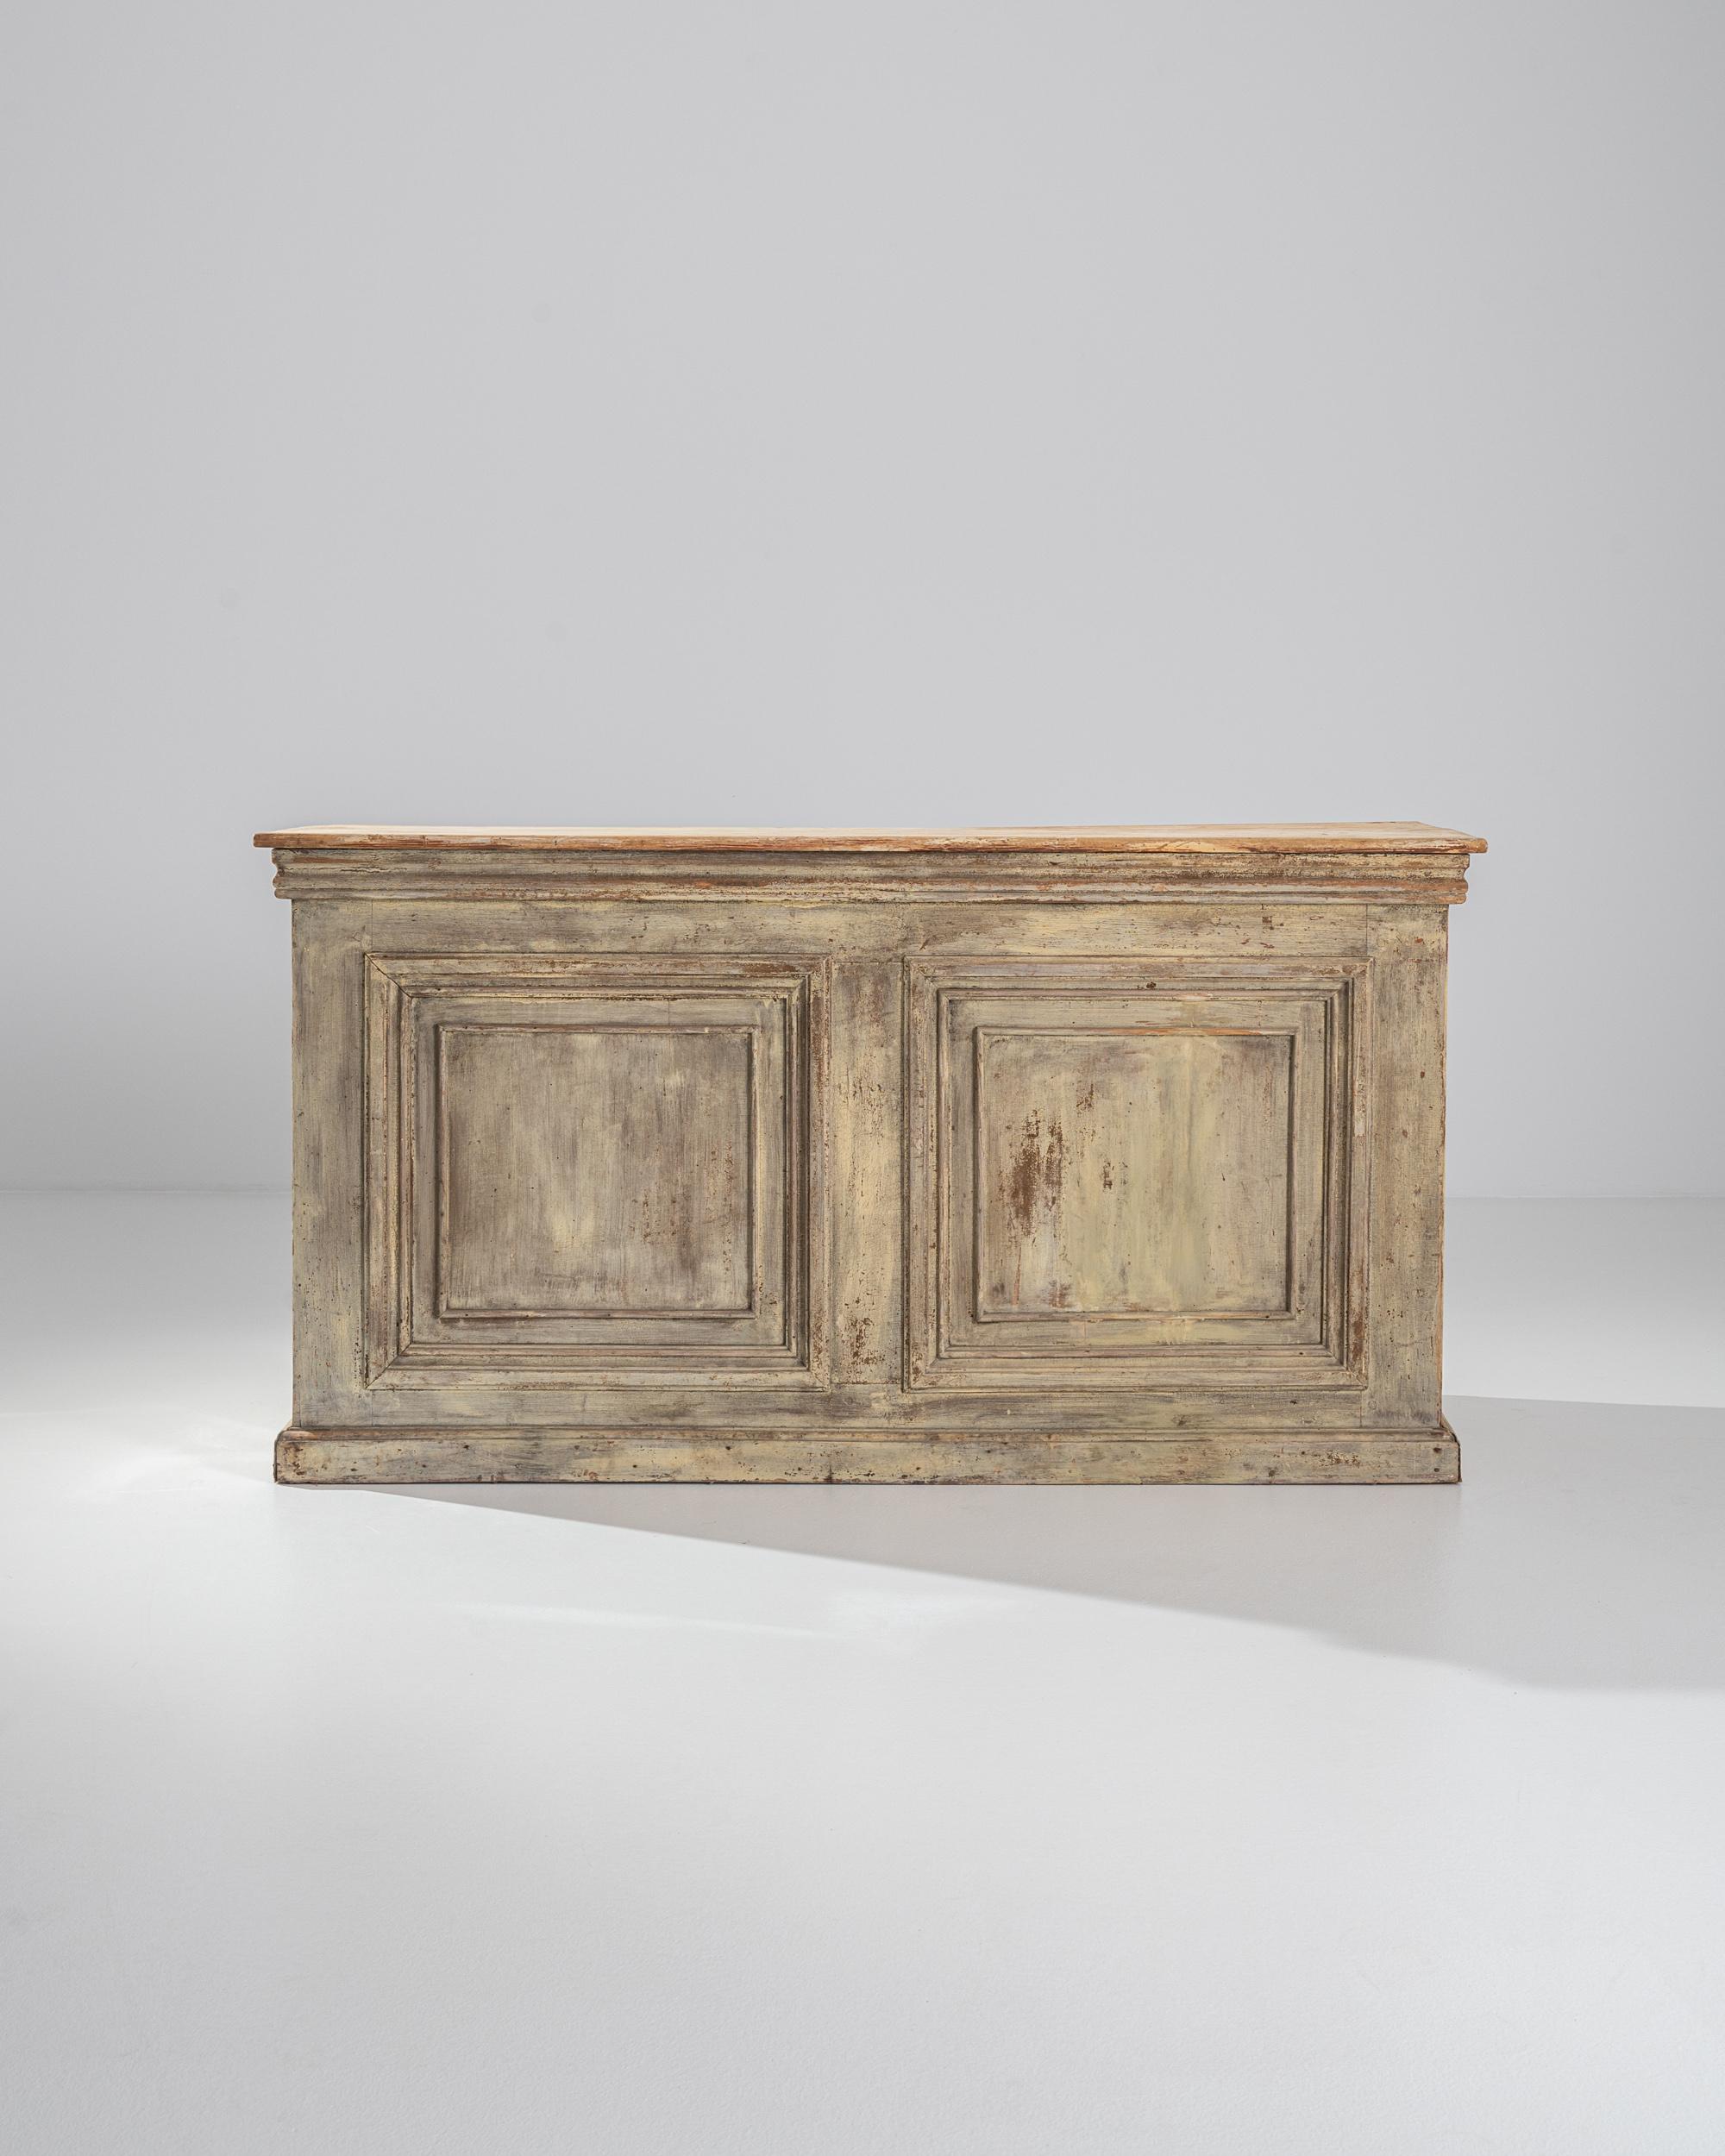 This antique wooden bar was once an elegant fixture in a bistro or restaurant. Made in France in the 1800s, the clean yet elegant composition evokes the shape of a classical plinth: the decorative details of the right-angled paneling and carved